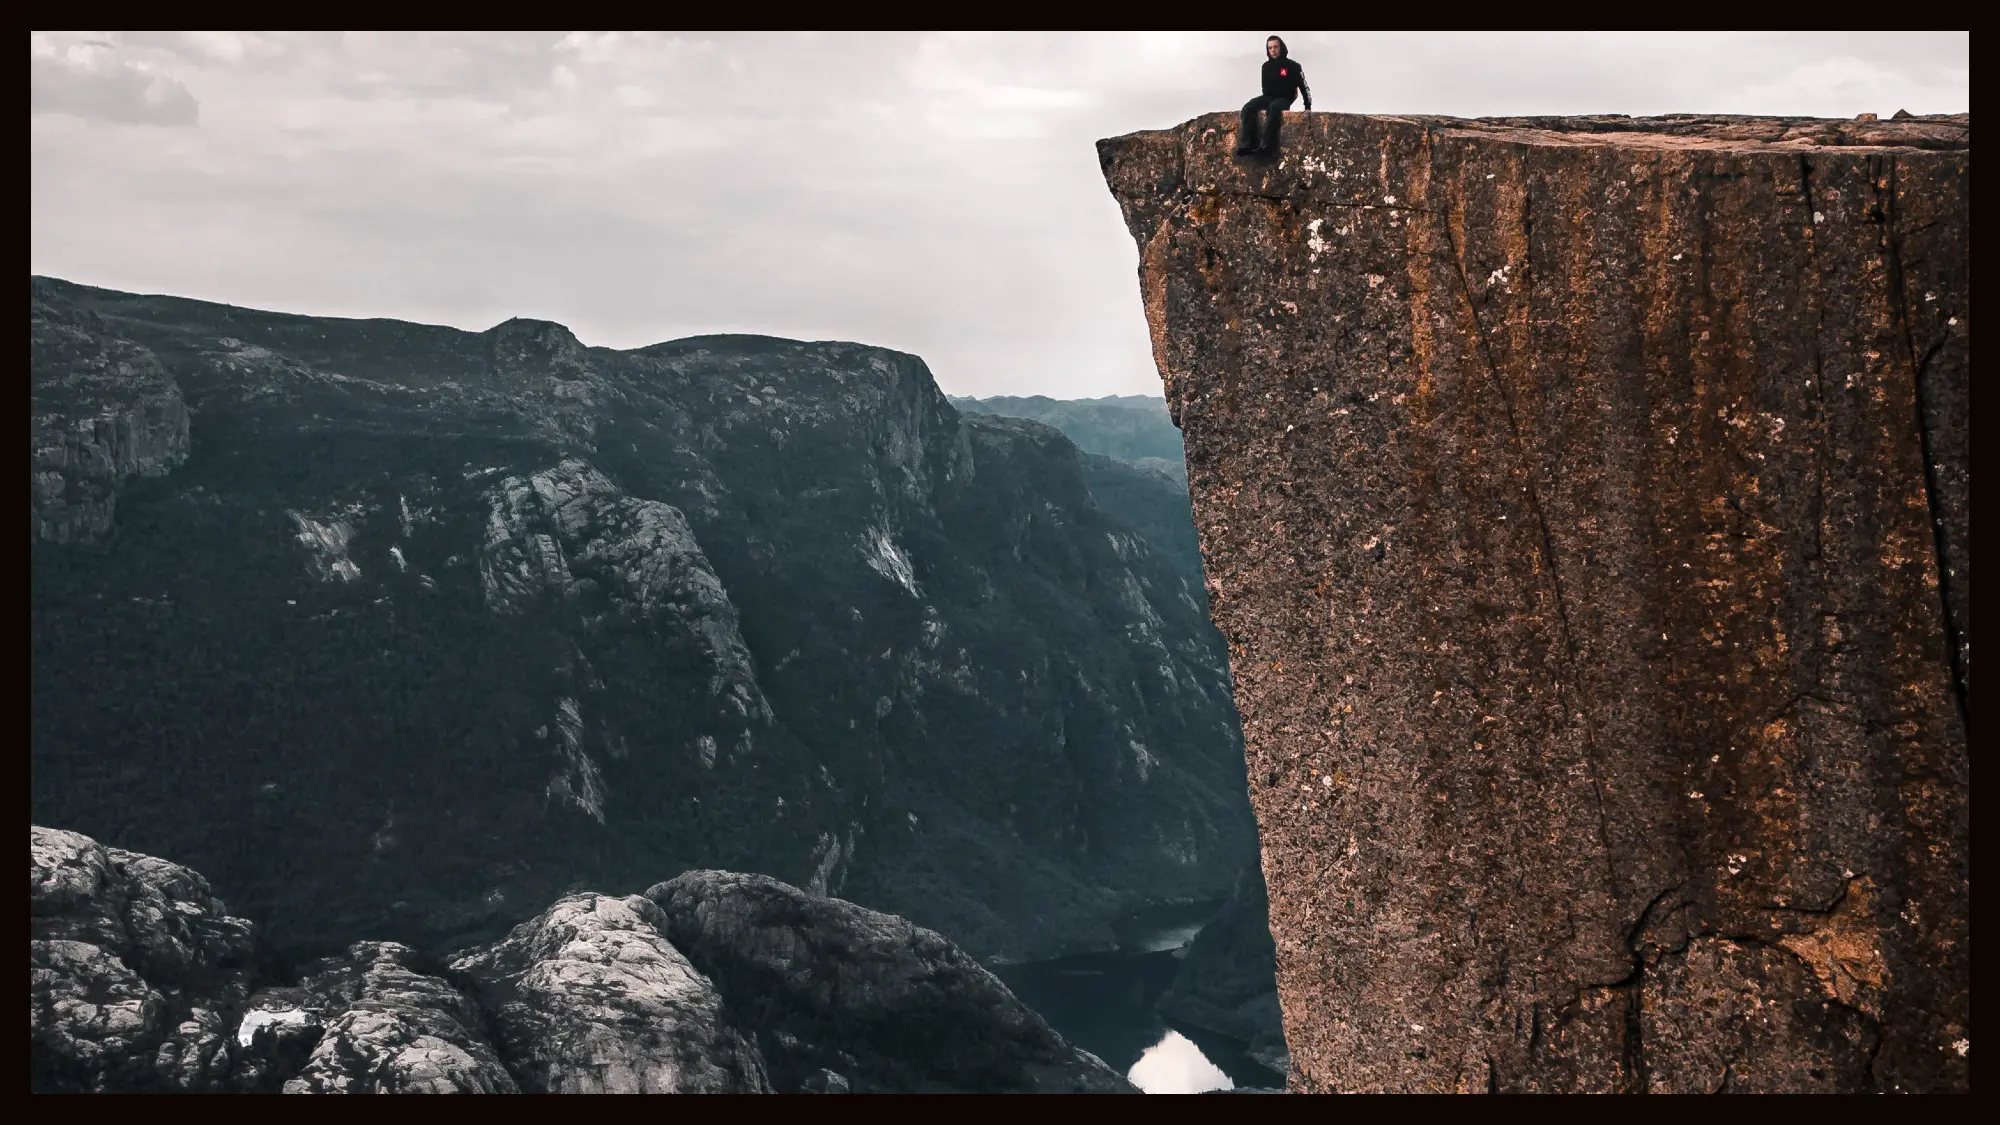 A solitary figure standing on the edge of a high cliff overlooking a deep valley with rugged mountains in the background, conveying a sense of adventure and solitude.